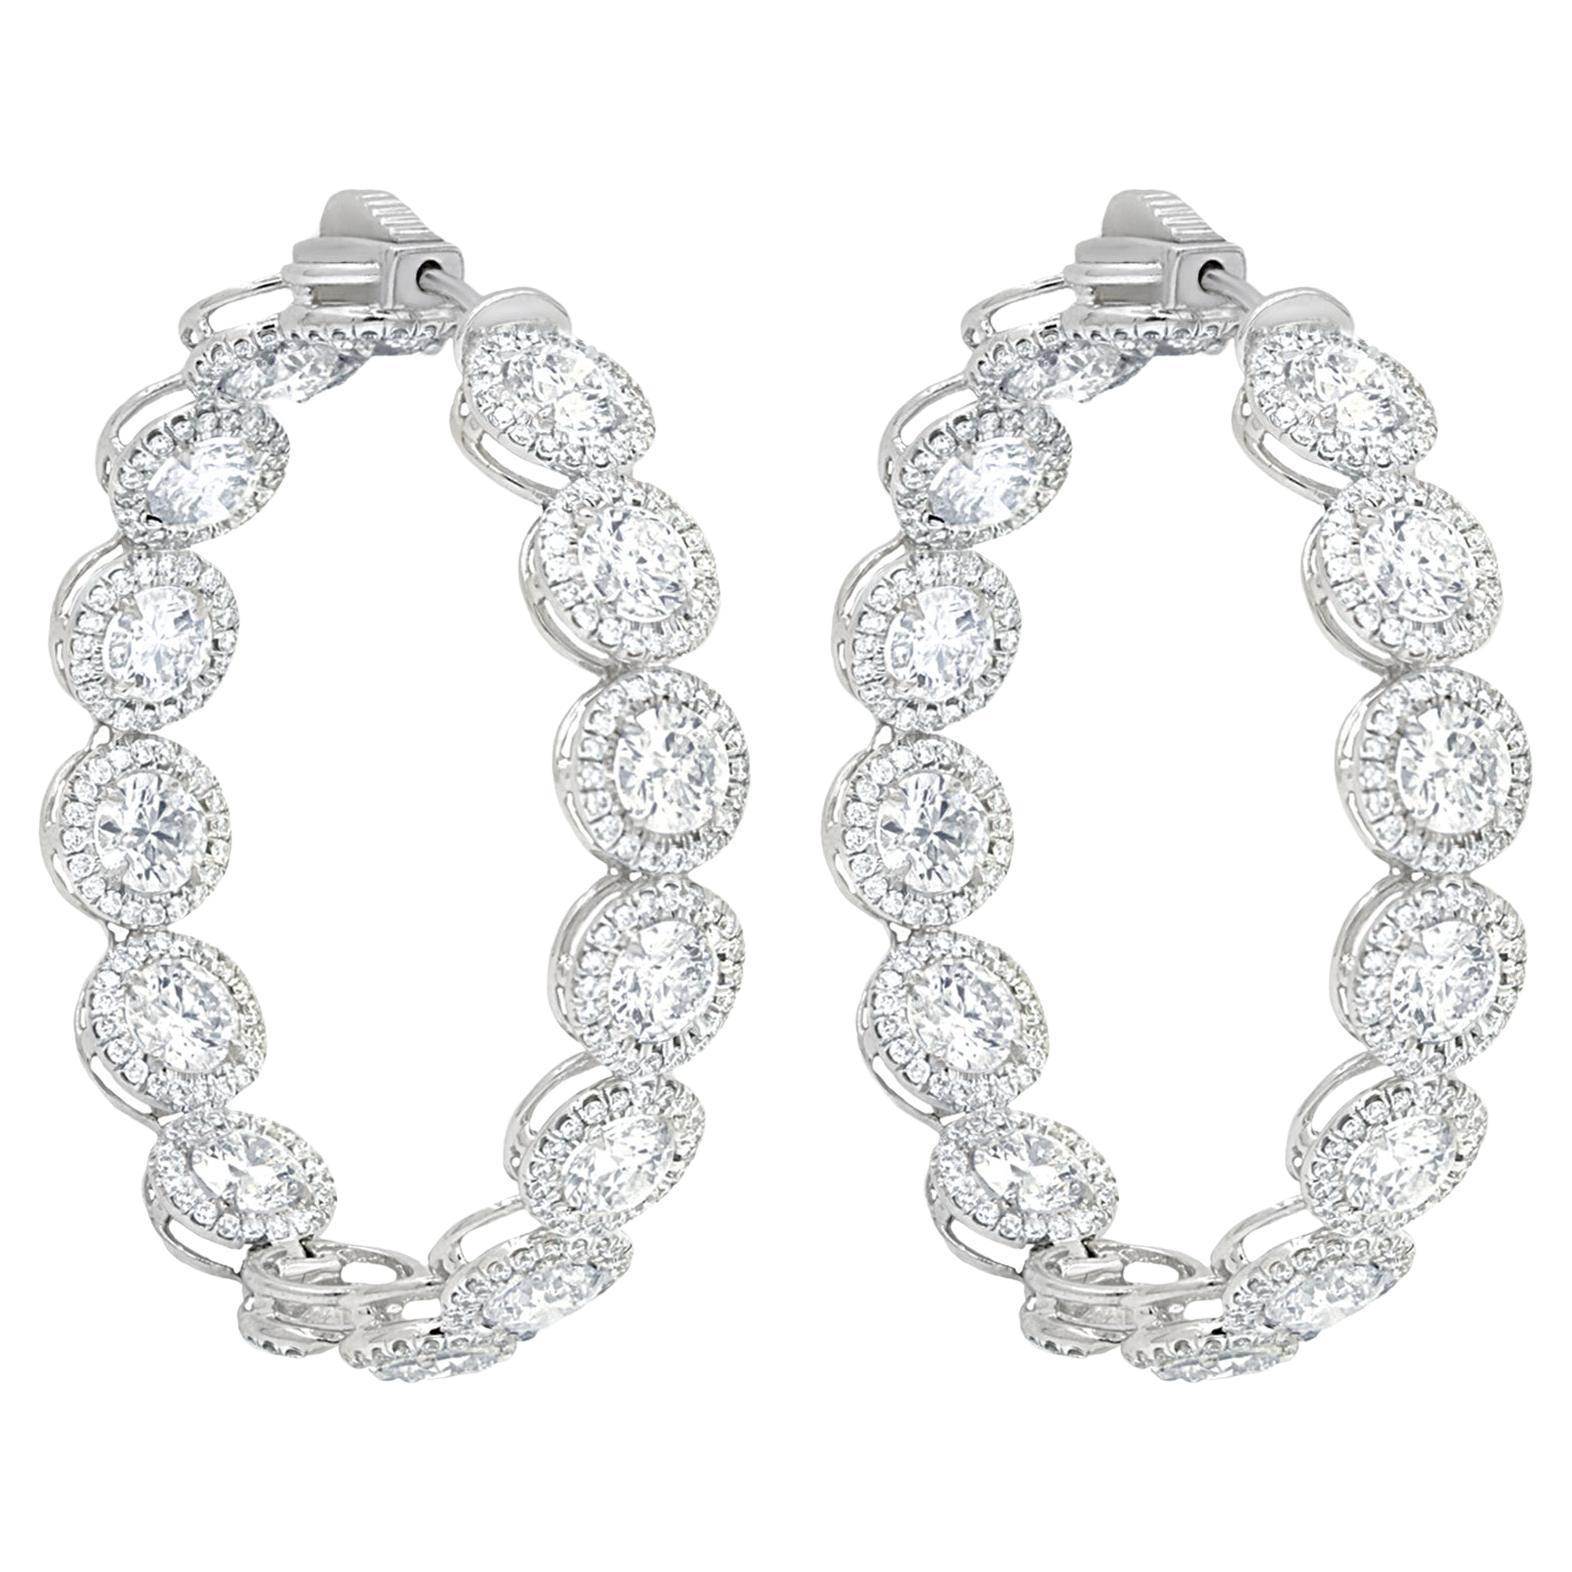 Diana M. 18 kt white gold, 1.50" inside-out hoop earrings with 12.20cts halo 